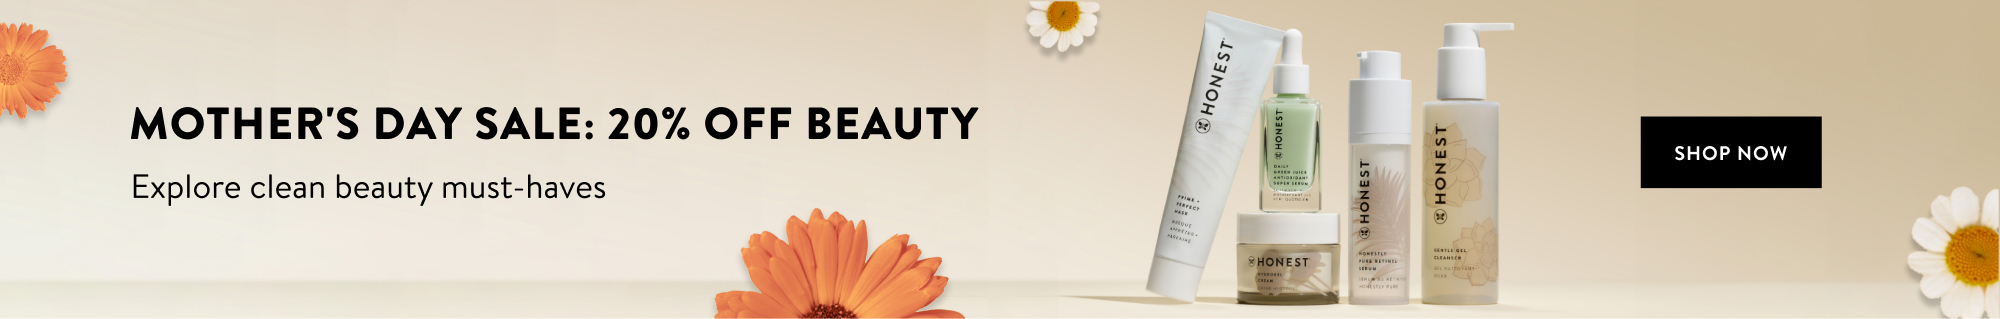 Mother's Day Sale: 20% off Beauty. Valid through 5/12/24. Terms & conditions apply.